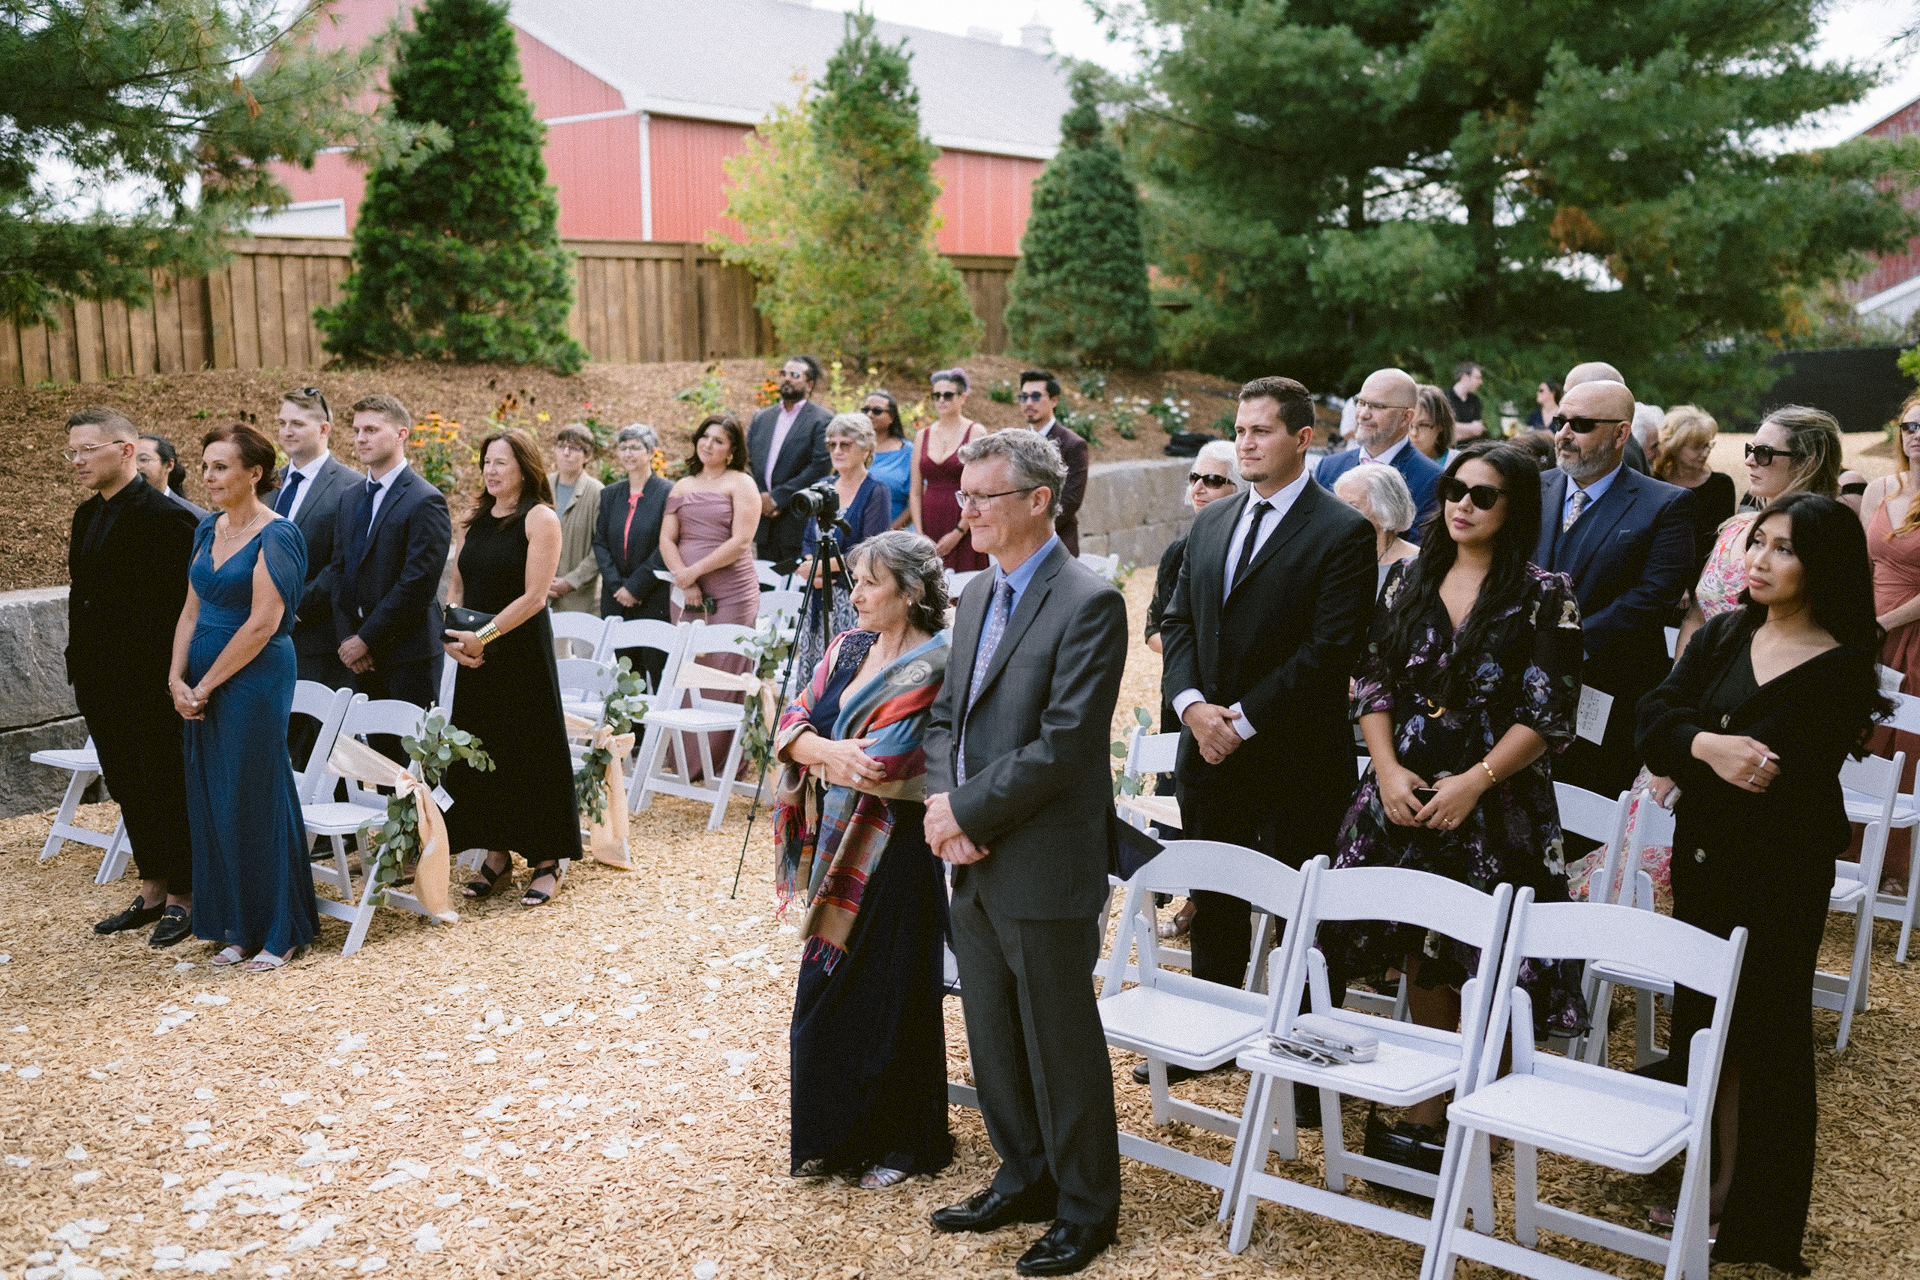 Guests standing at an outdoor wedding ceremony at Cambium Farms